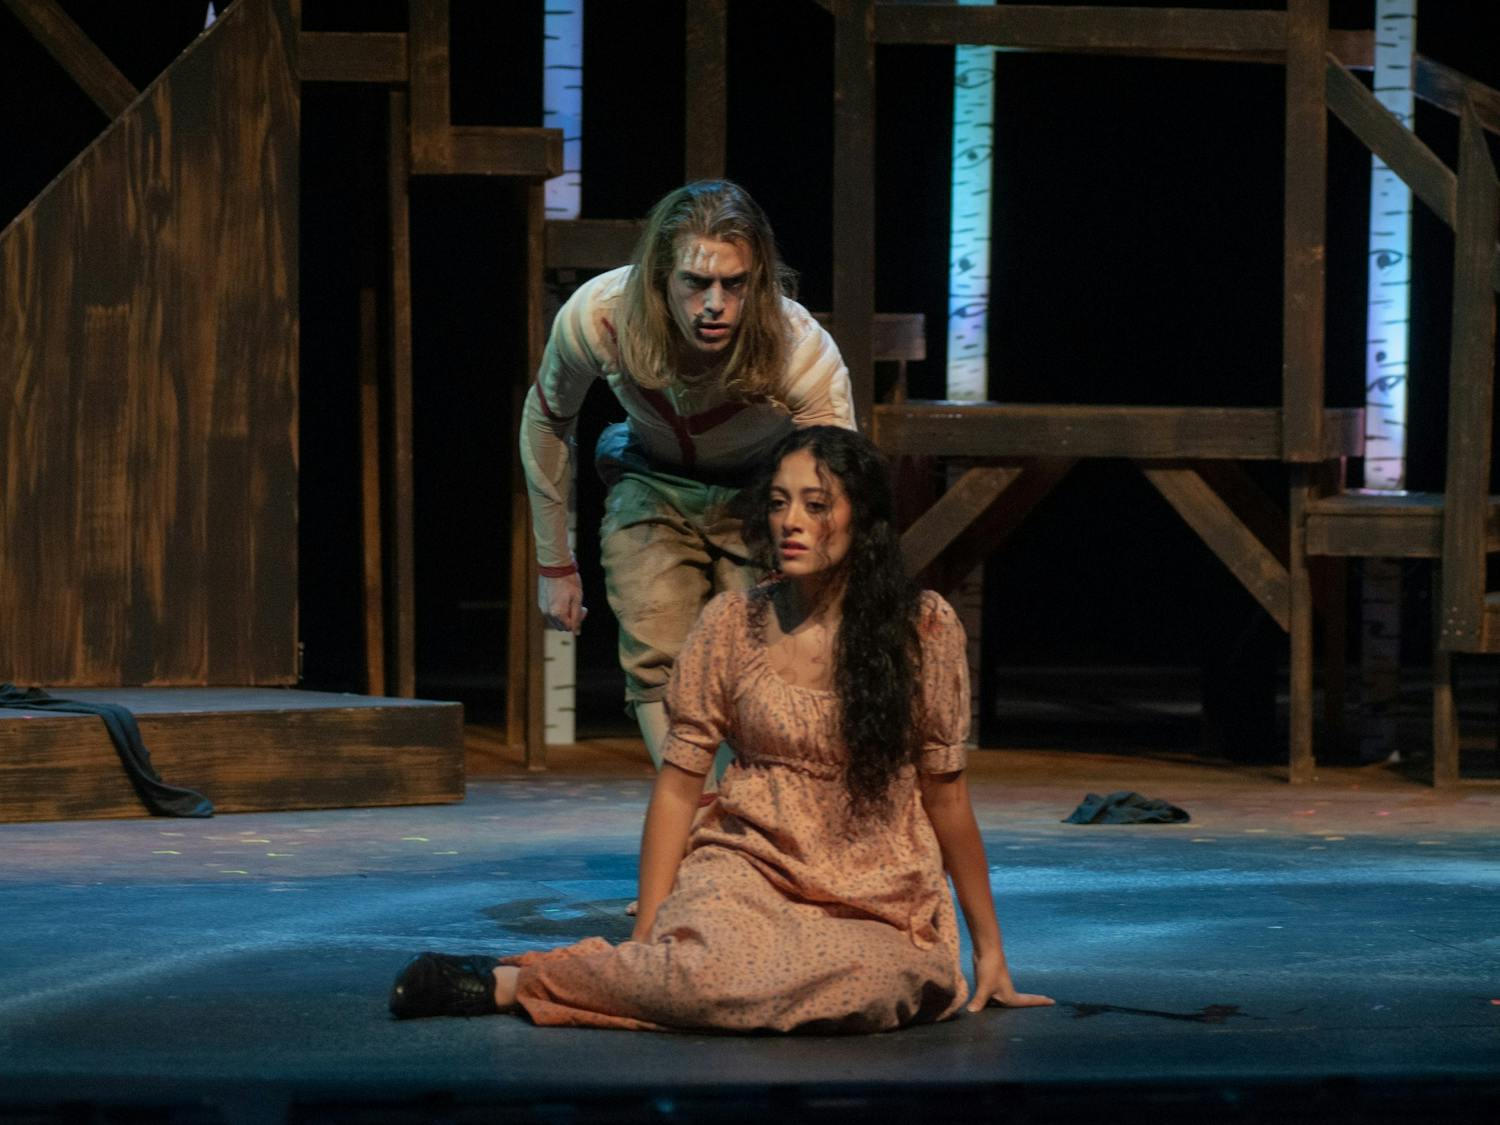 GALLERY: ‘It’s alive!’: UNM production of ‘Frankenstein’ electrifies Rodey Theatre